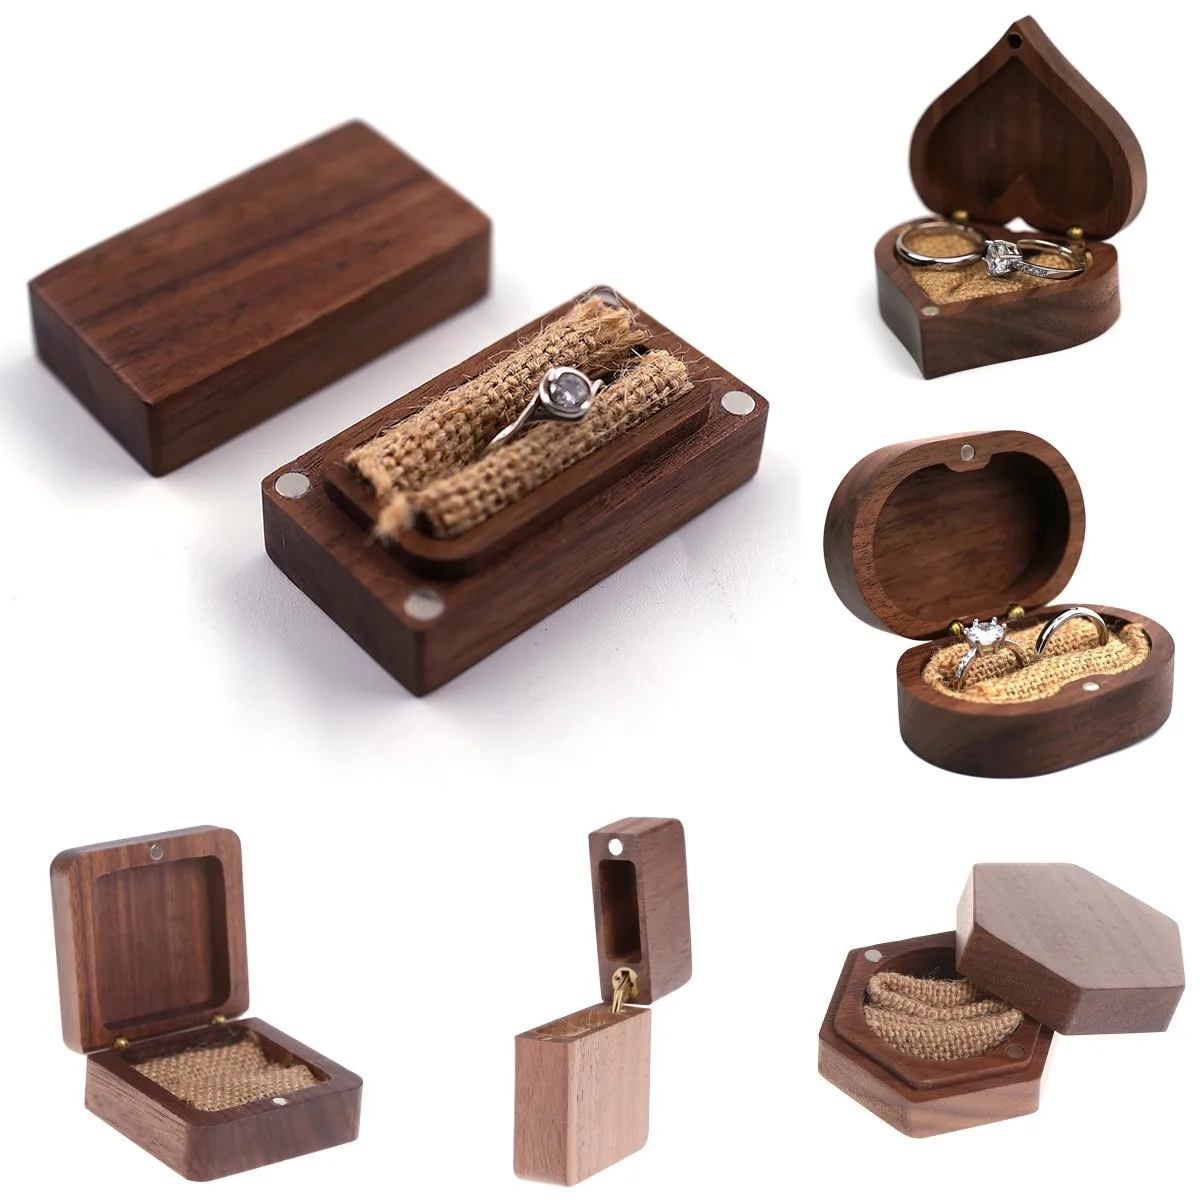 1Pc Wood Engagement Ring Bearer Box Rustic Bride & Groom Wedding Ring Box Pillow Square/Round Gift Wooden Jewelry Box